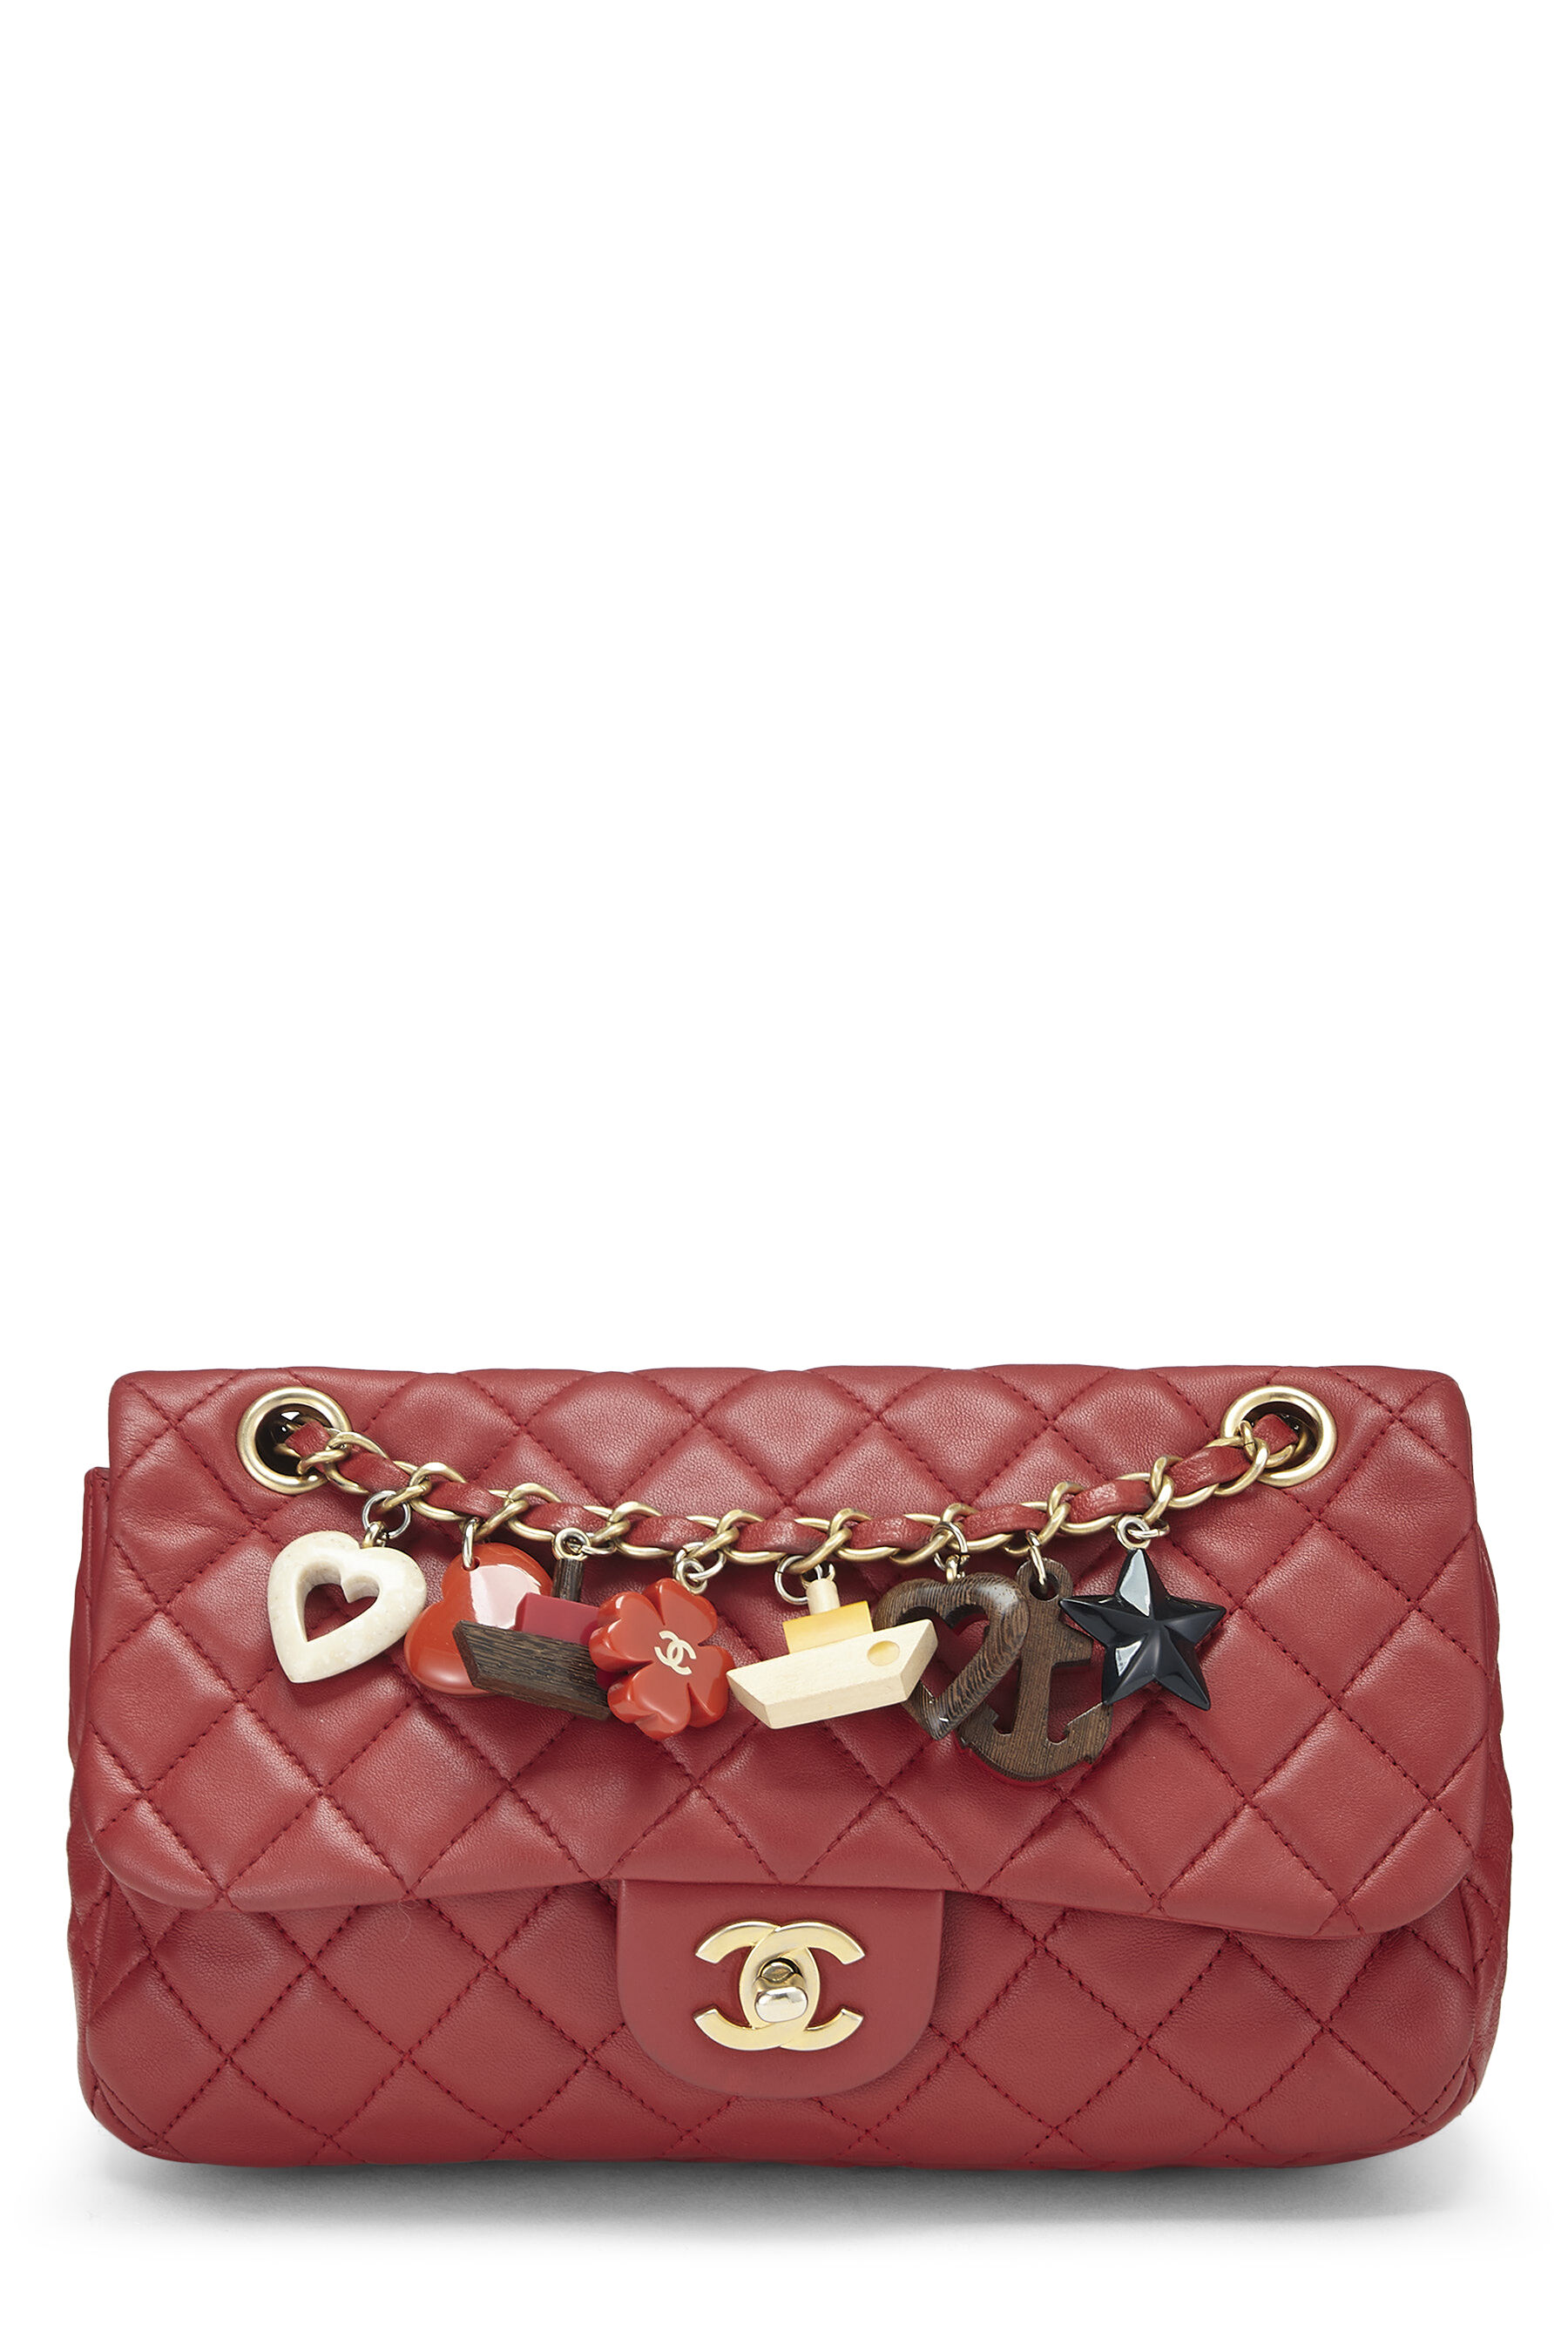 Chanel Red Quilted Lambskin Marine Charms Flap Medium